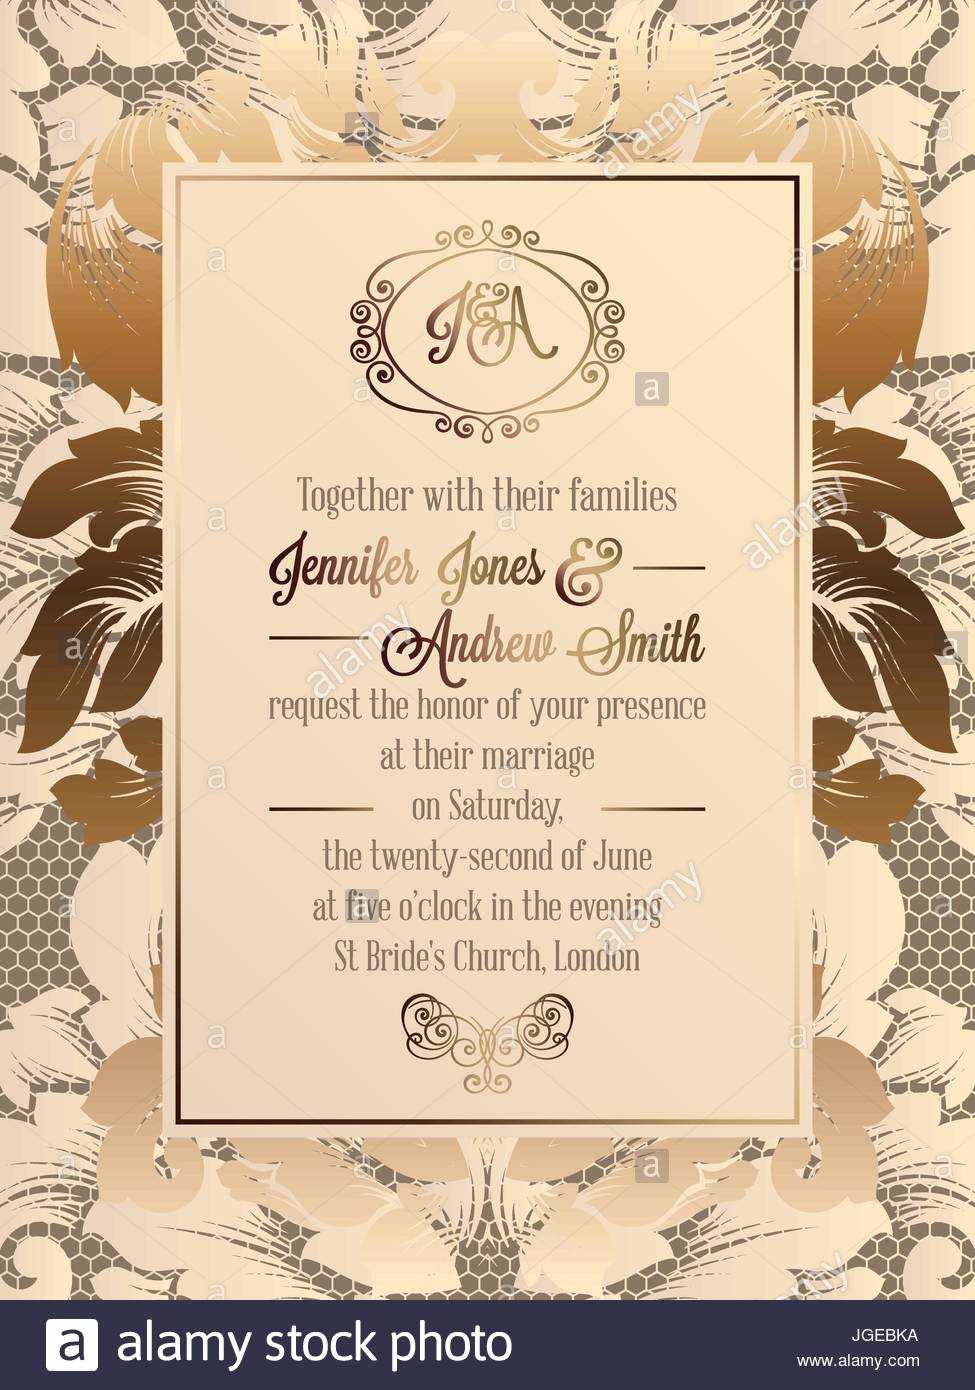 035 Vintage Baroque Style Wedding Invitation Card Template With Regard To Church Wedding Invitation Card Template